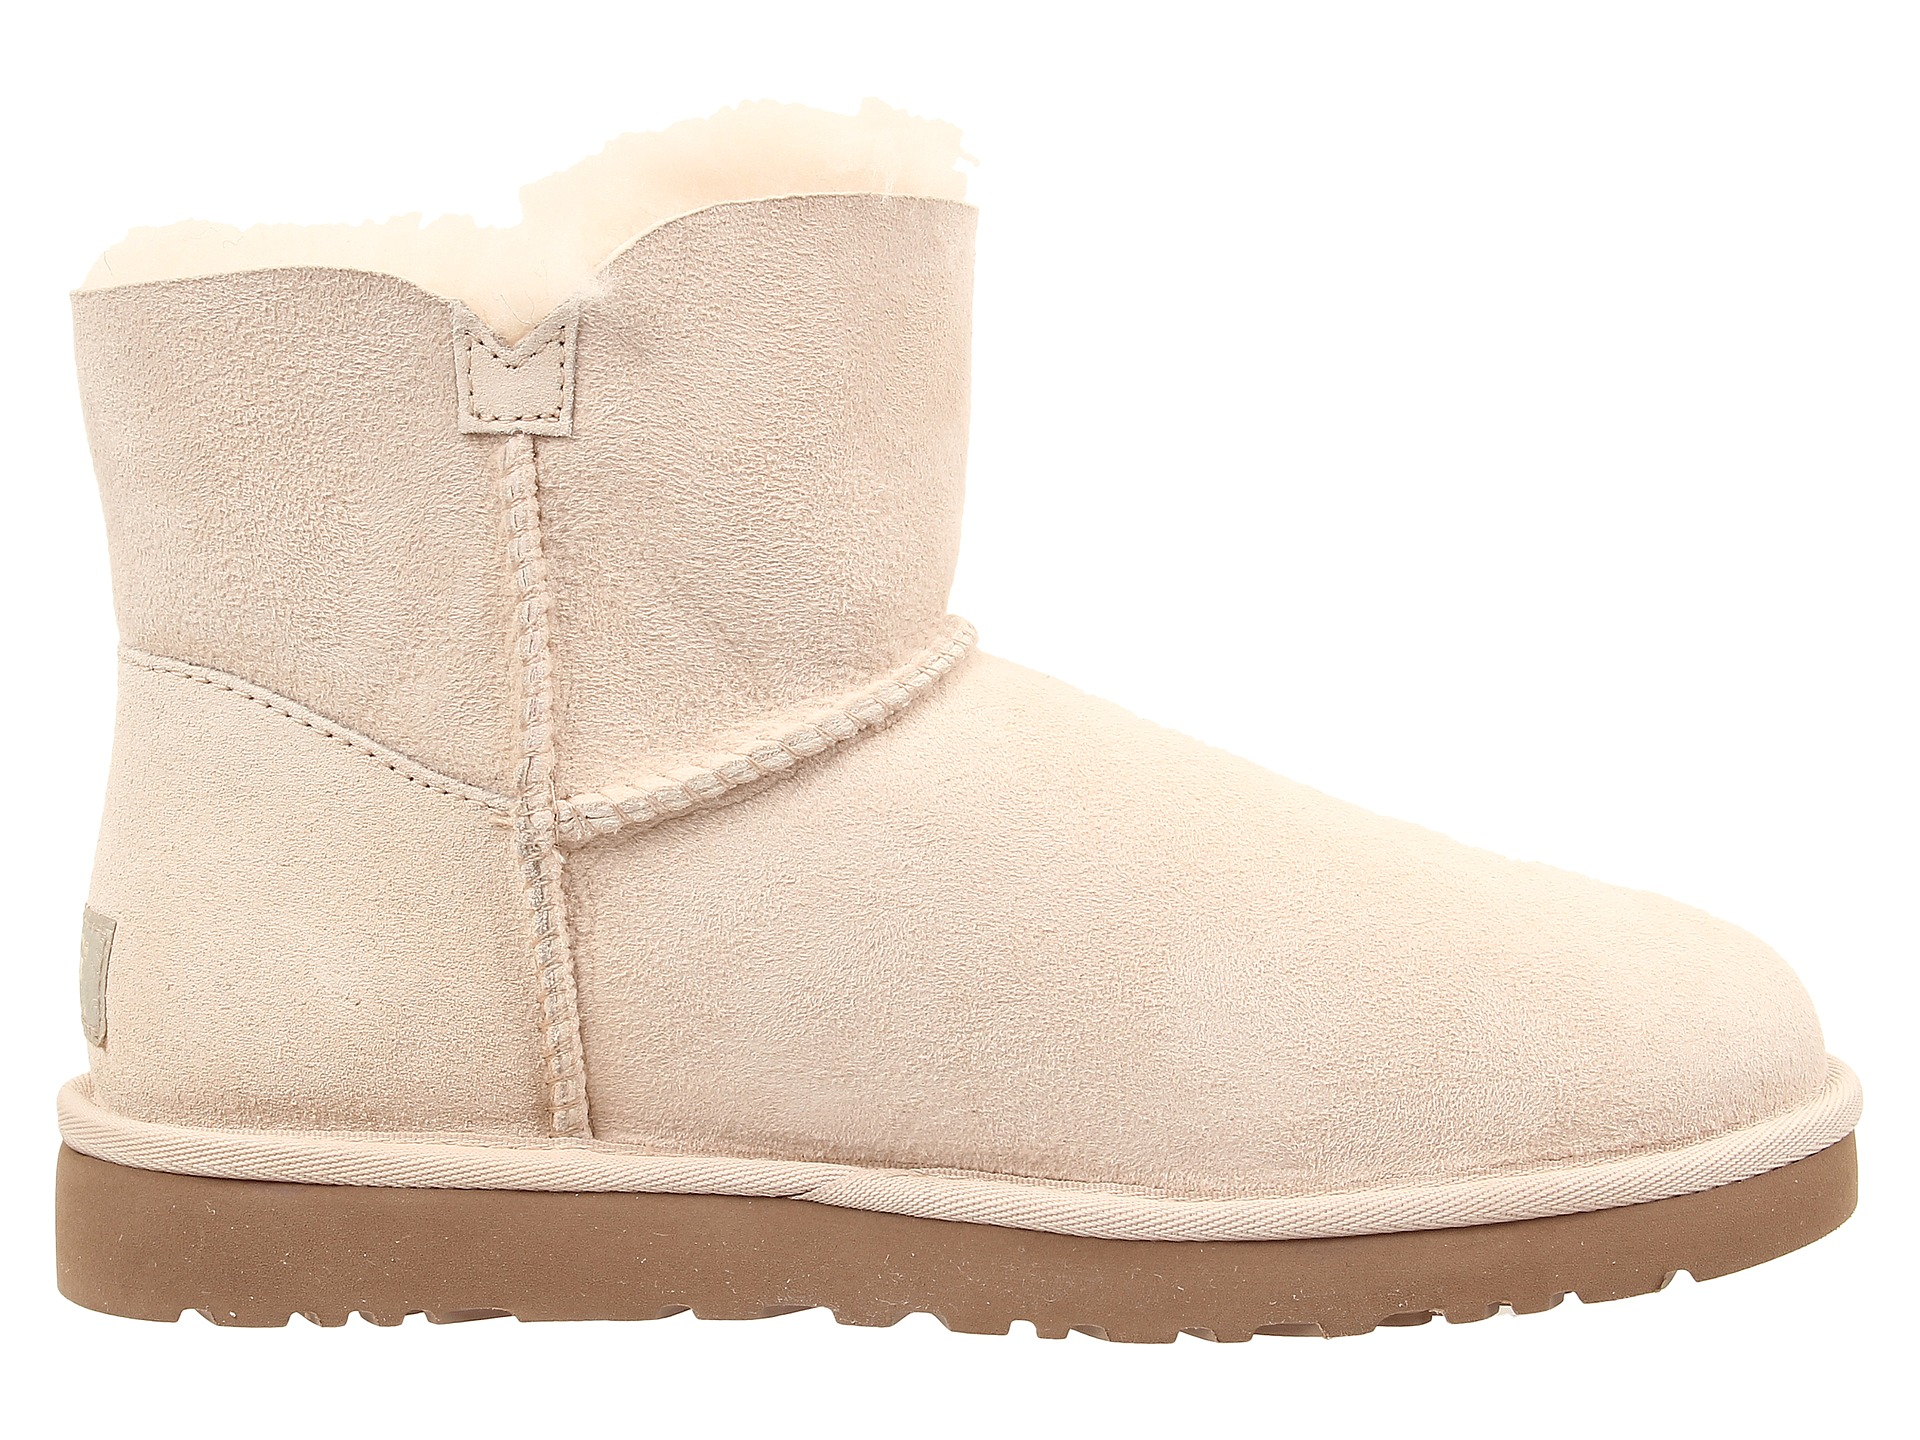 Ugg Boots Europe Cruises 2015 From New Usa | Division of Global Affairs